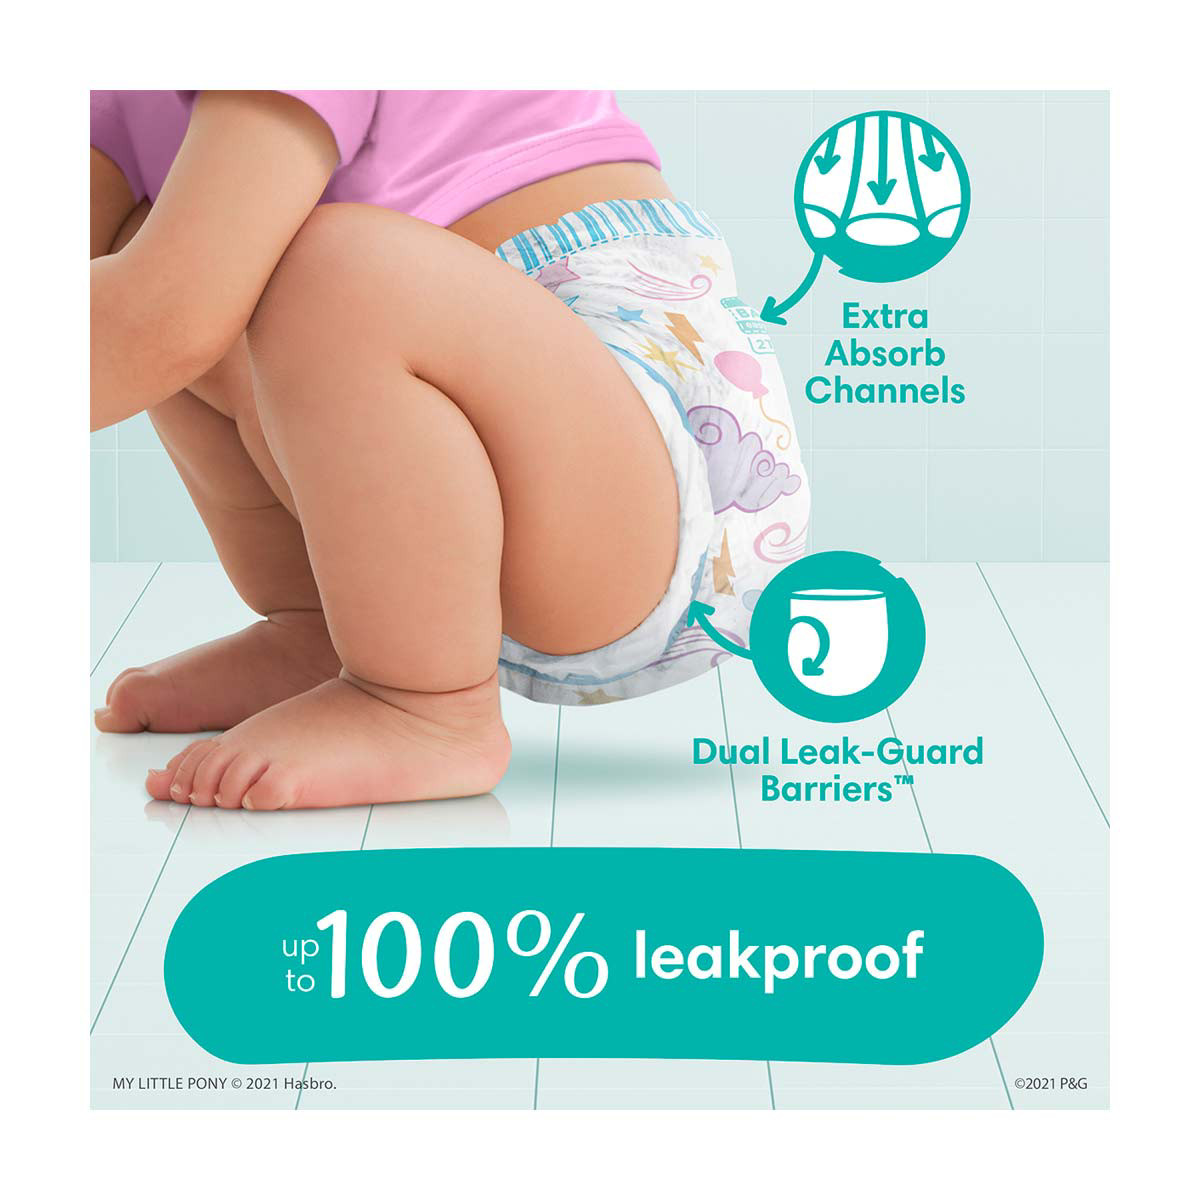 Pampers Easy Ups Girls' Training Pants (Pack of 4) 